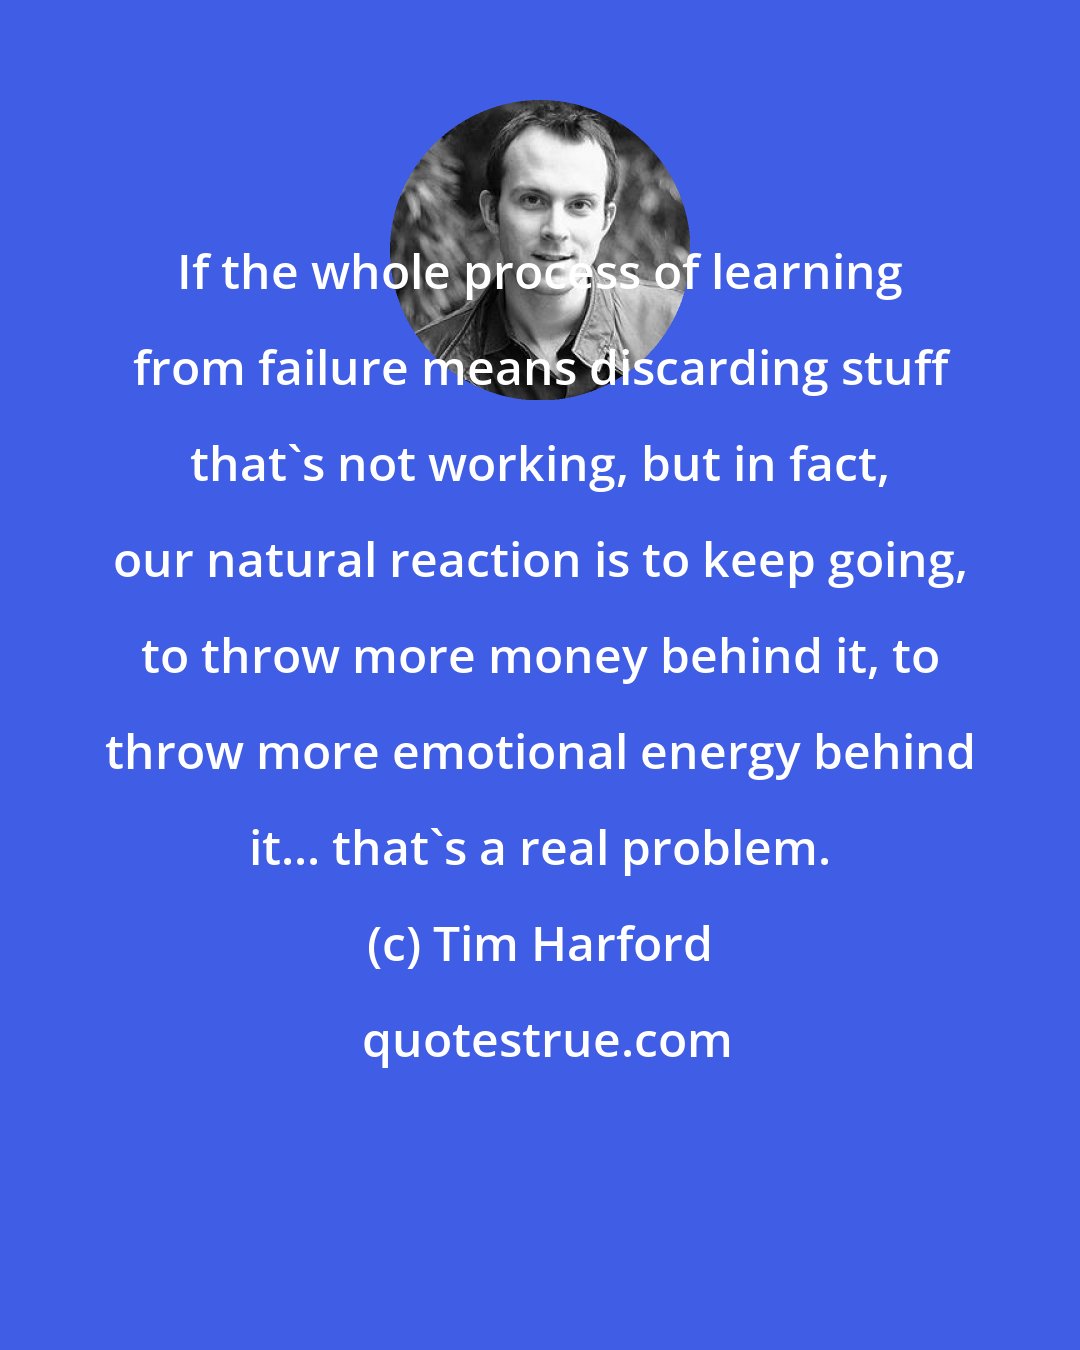 Tim Harford: If the whole process of learning from failure means discarding stuff that's not working, but in fact, our natural reaction is to keep going, to throw more money behind it, to throw more emotional energy behind it... that's a real problem.